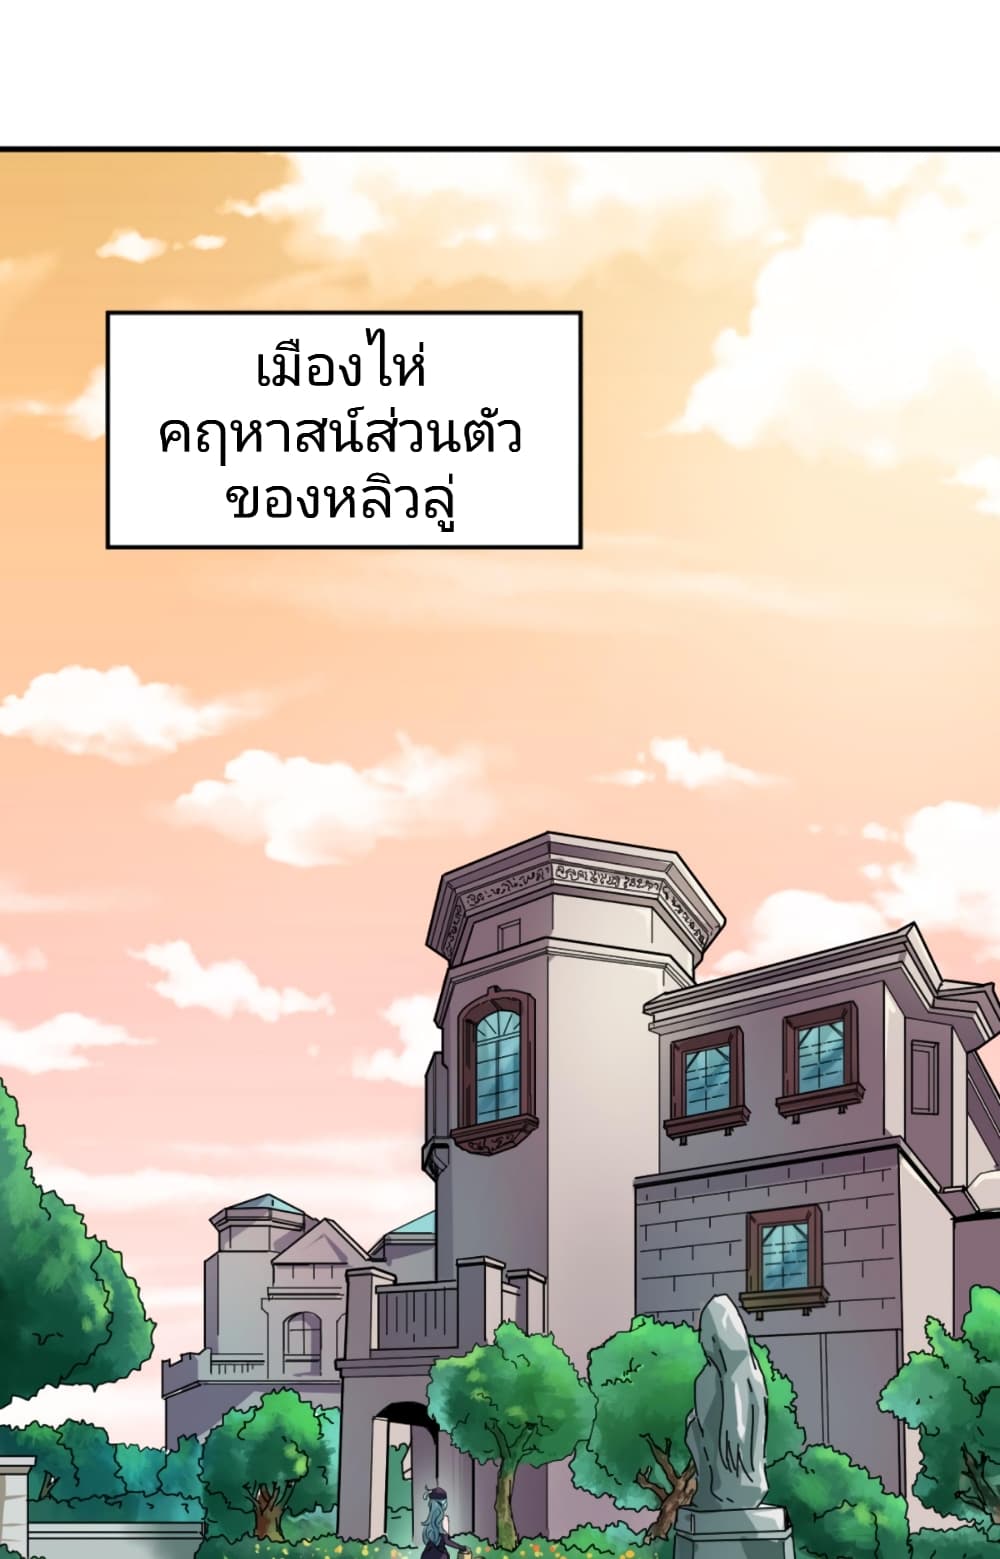 The Age of Ghost Spirits à¸à¸­à¸à¸à¸µà¹ 38 (23)